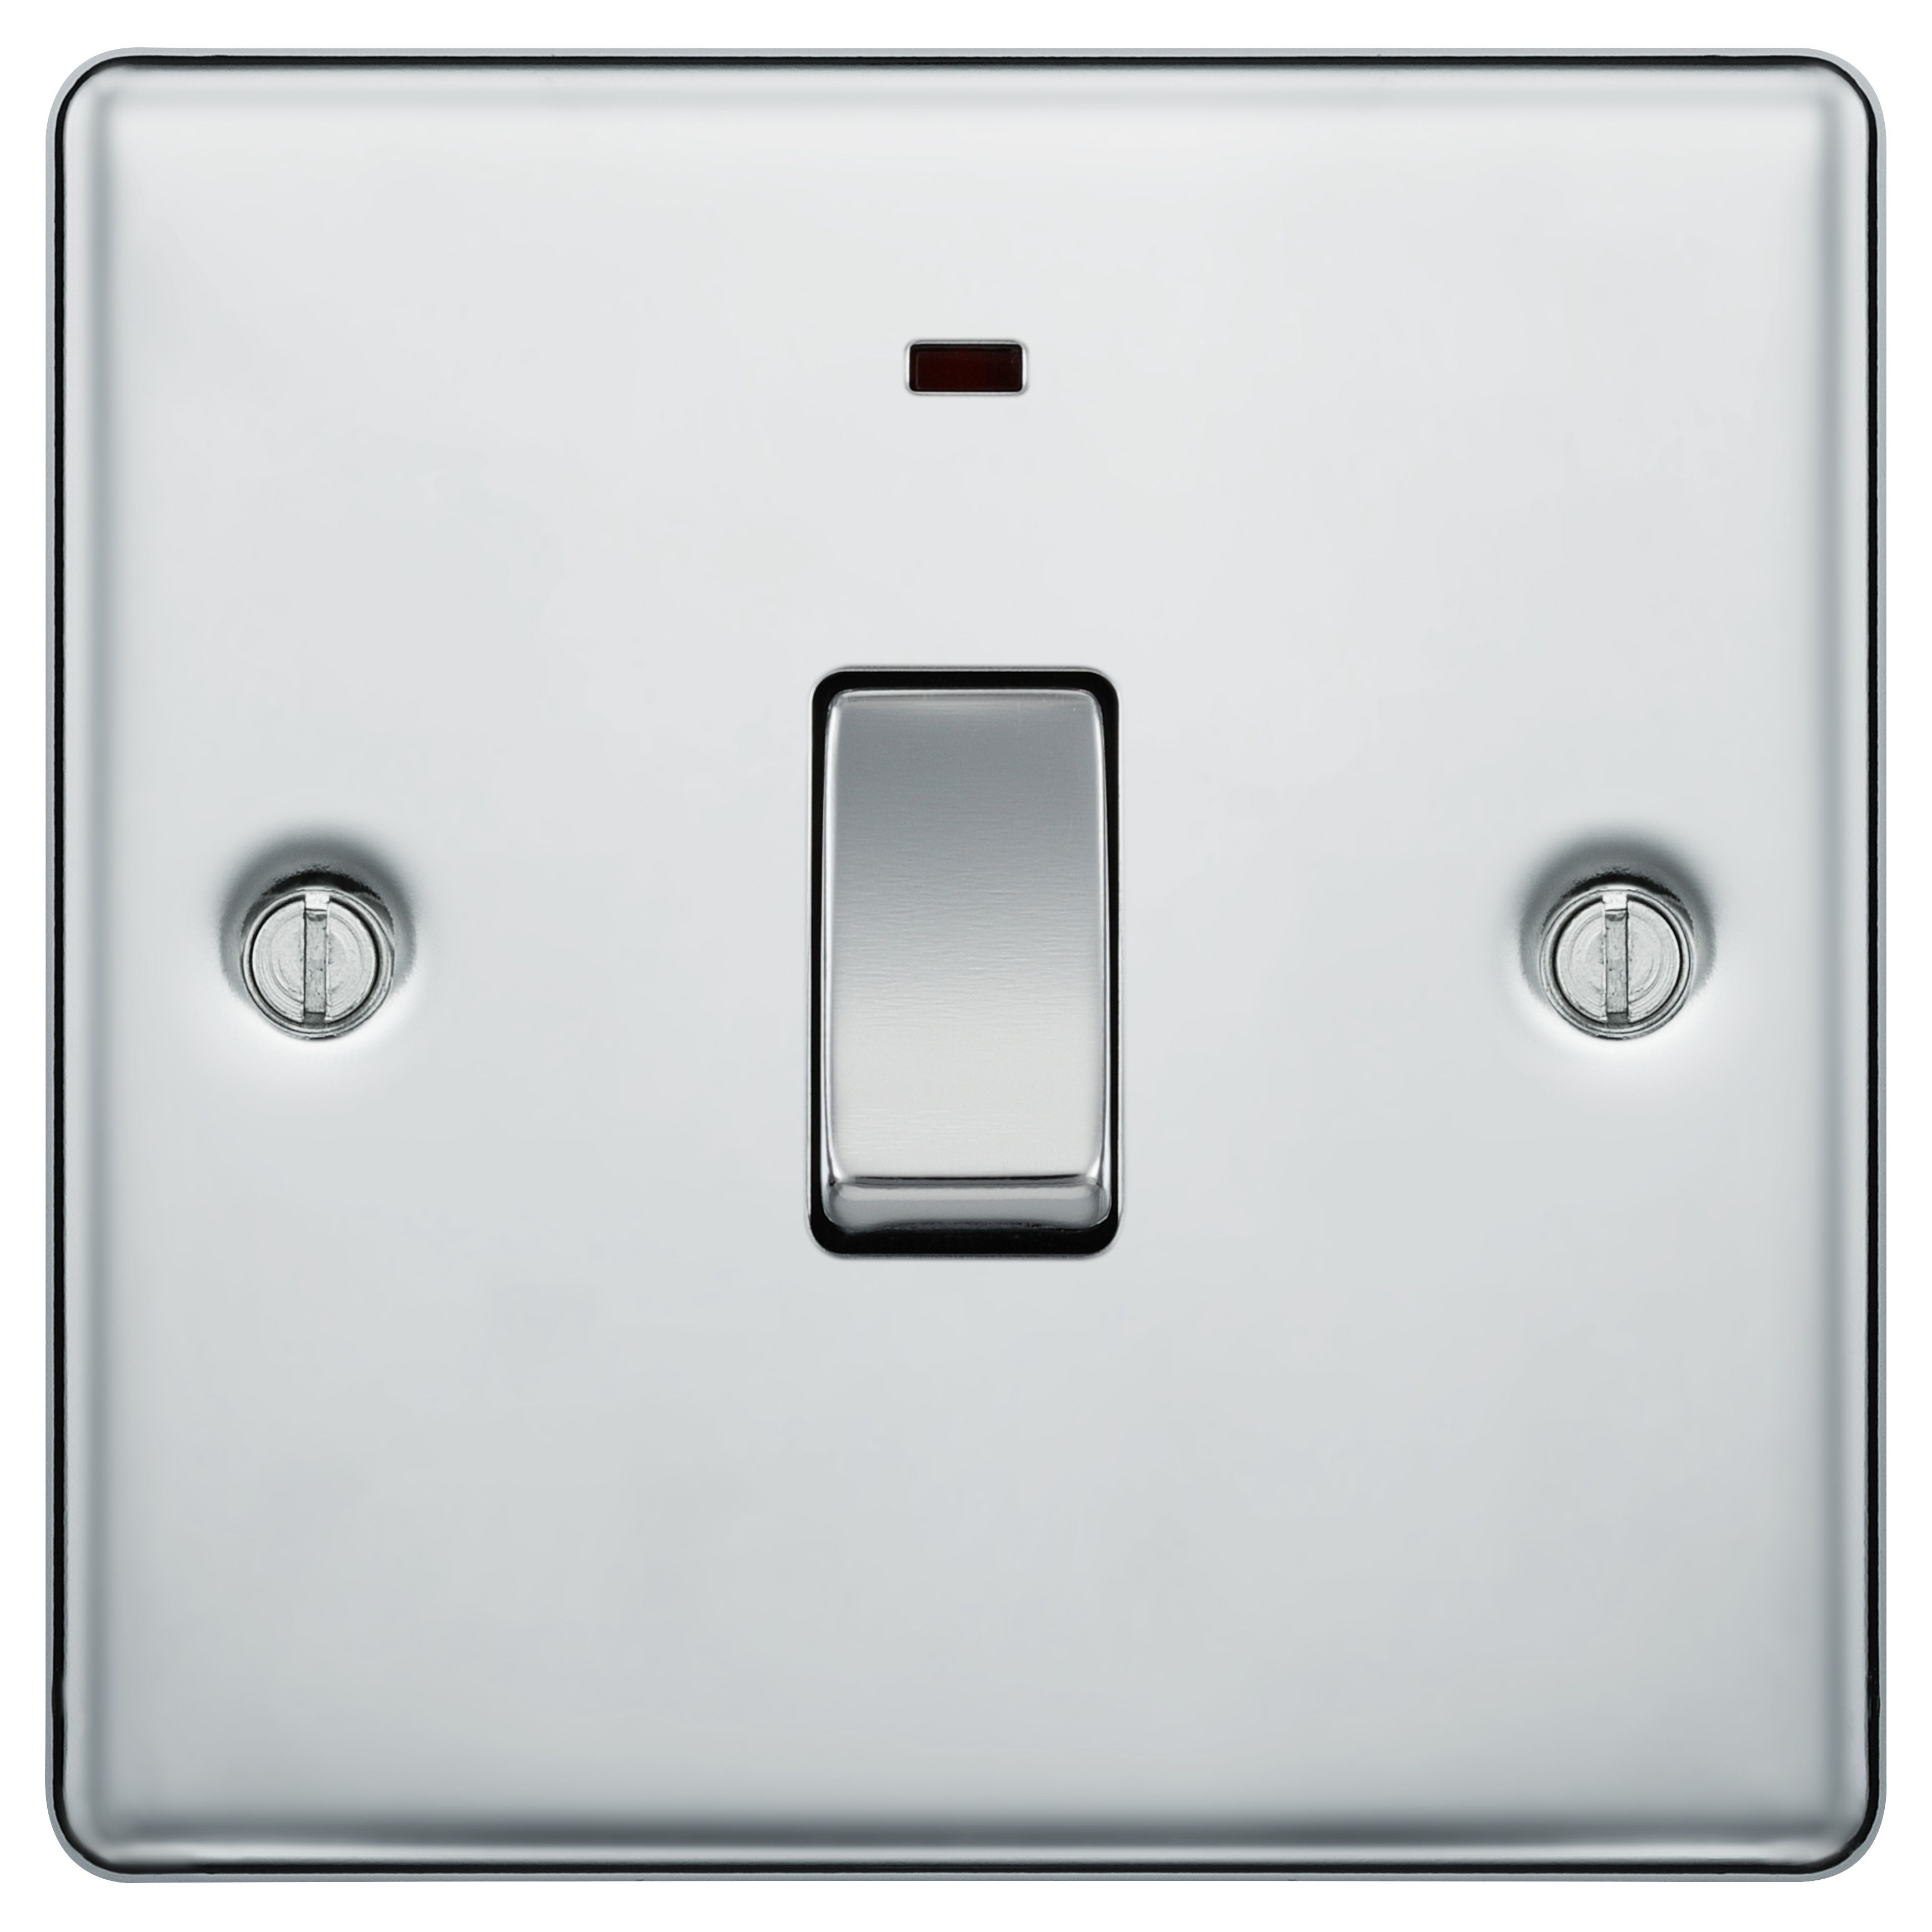 BG 20A Screwed Raised Plate Single Switch With Power Indicator - Polished Chrome